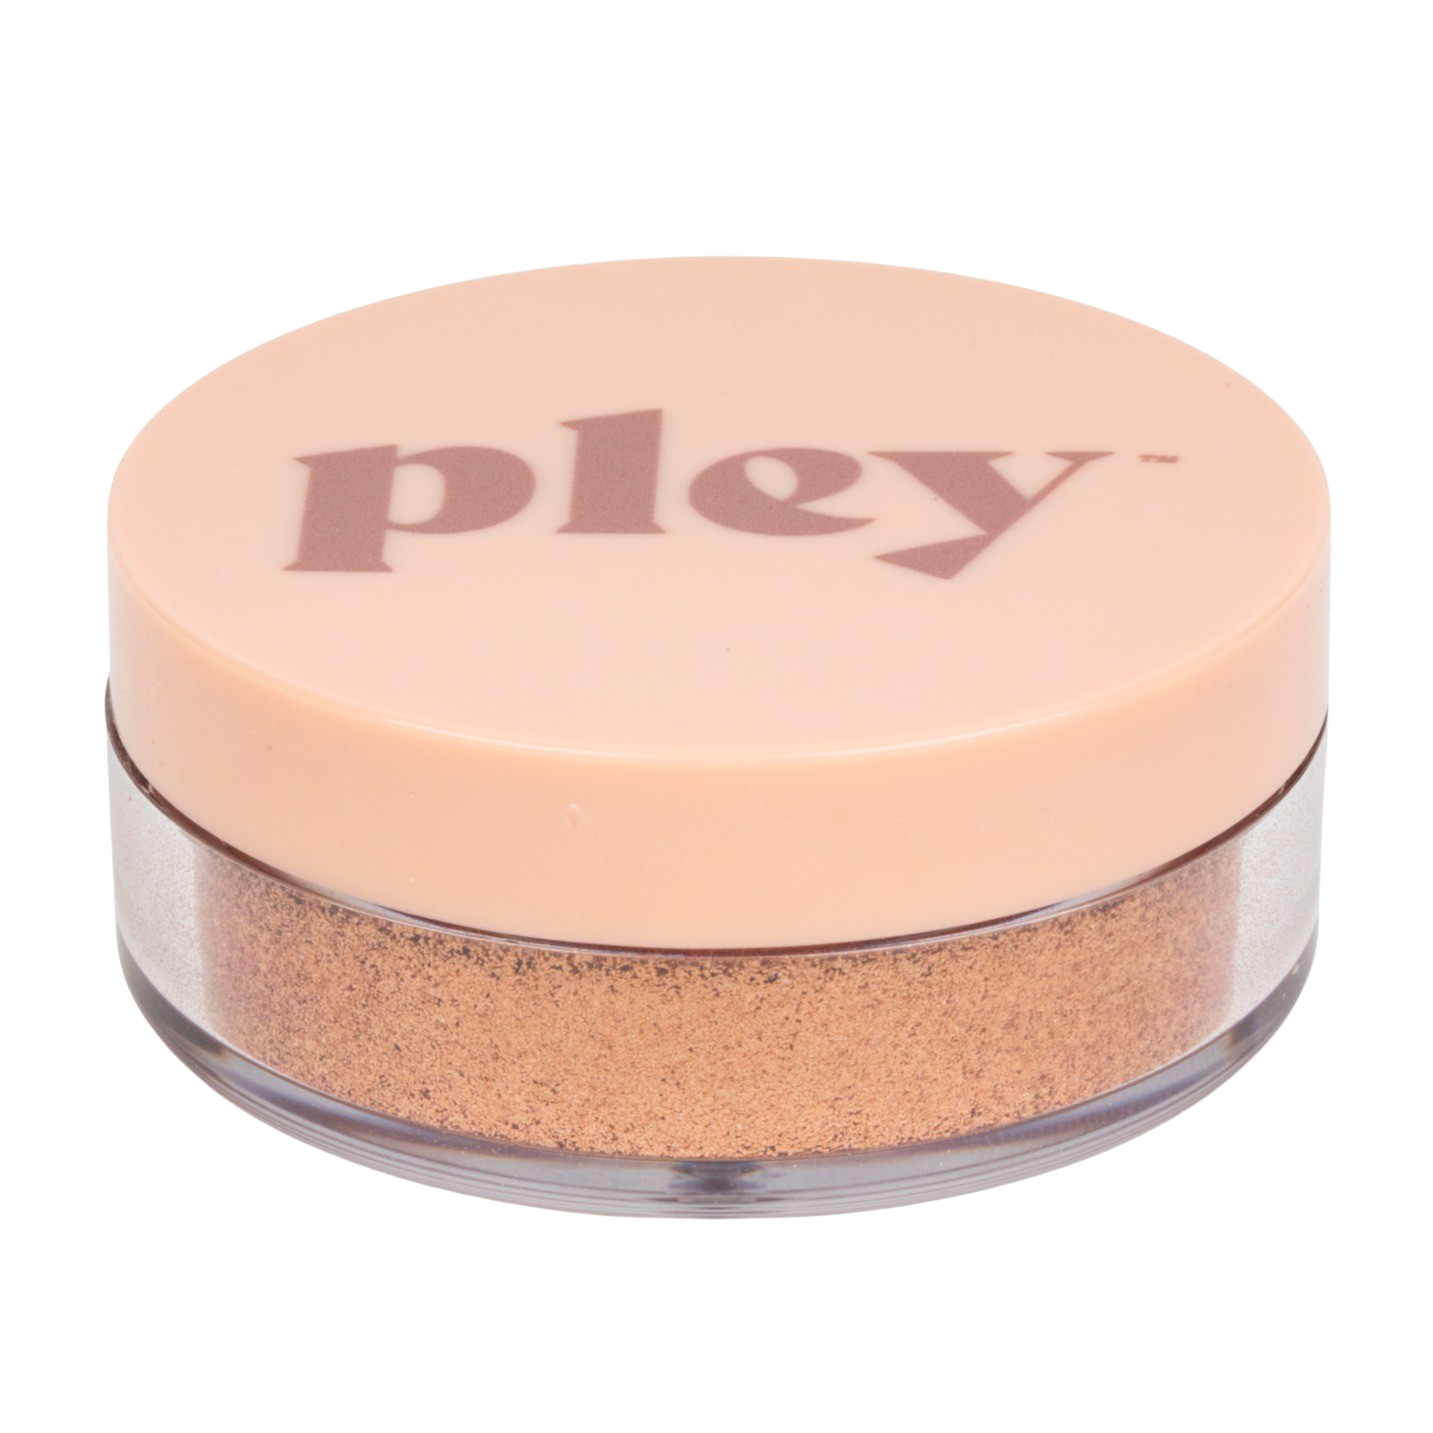 Load image into Gallery viewer, Pley Beauty Disco Dust
